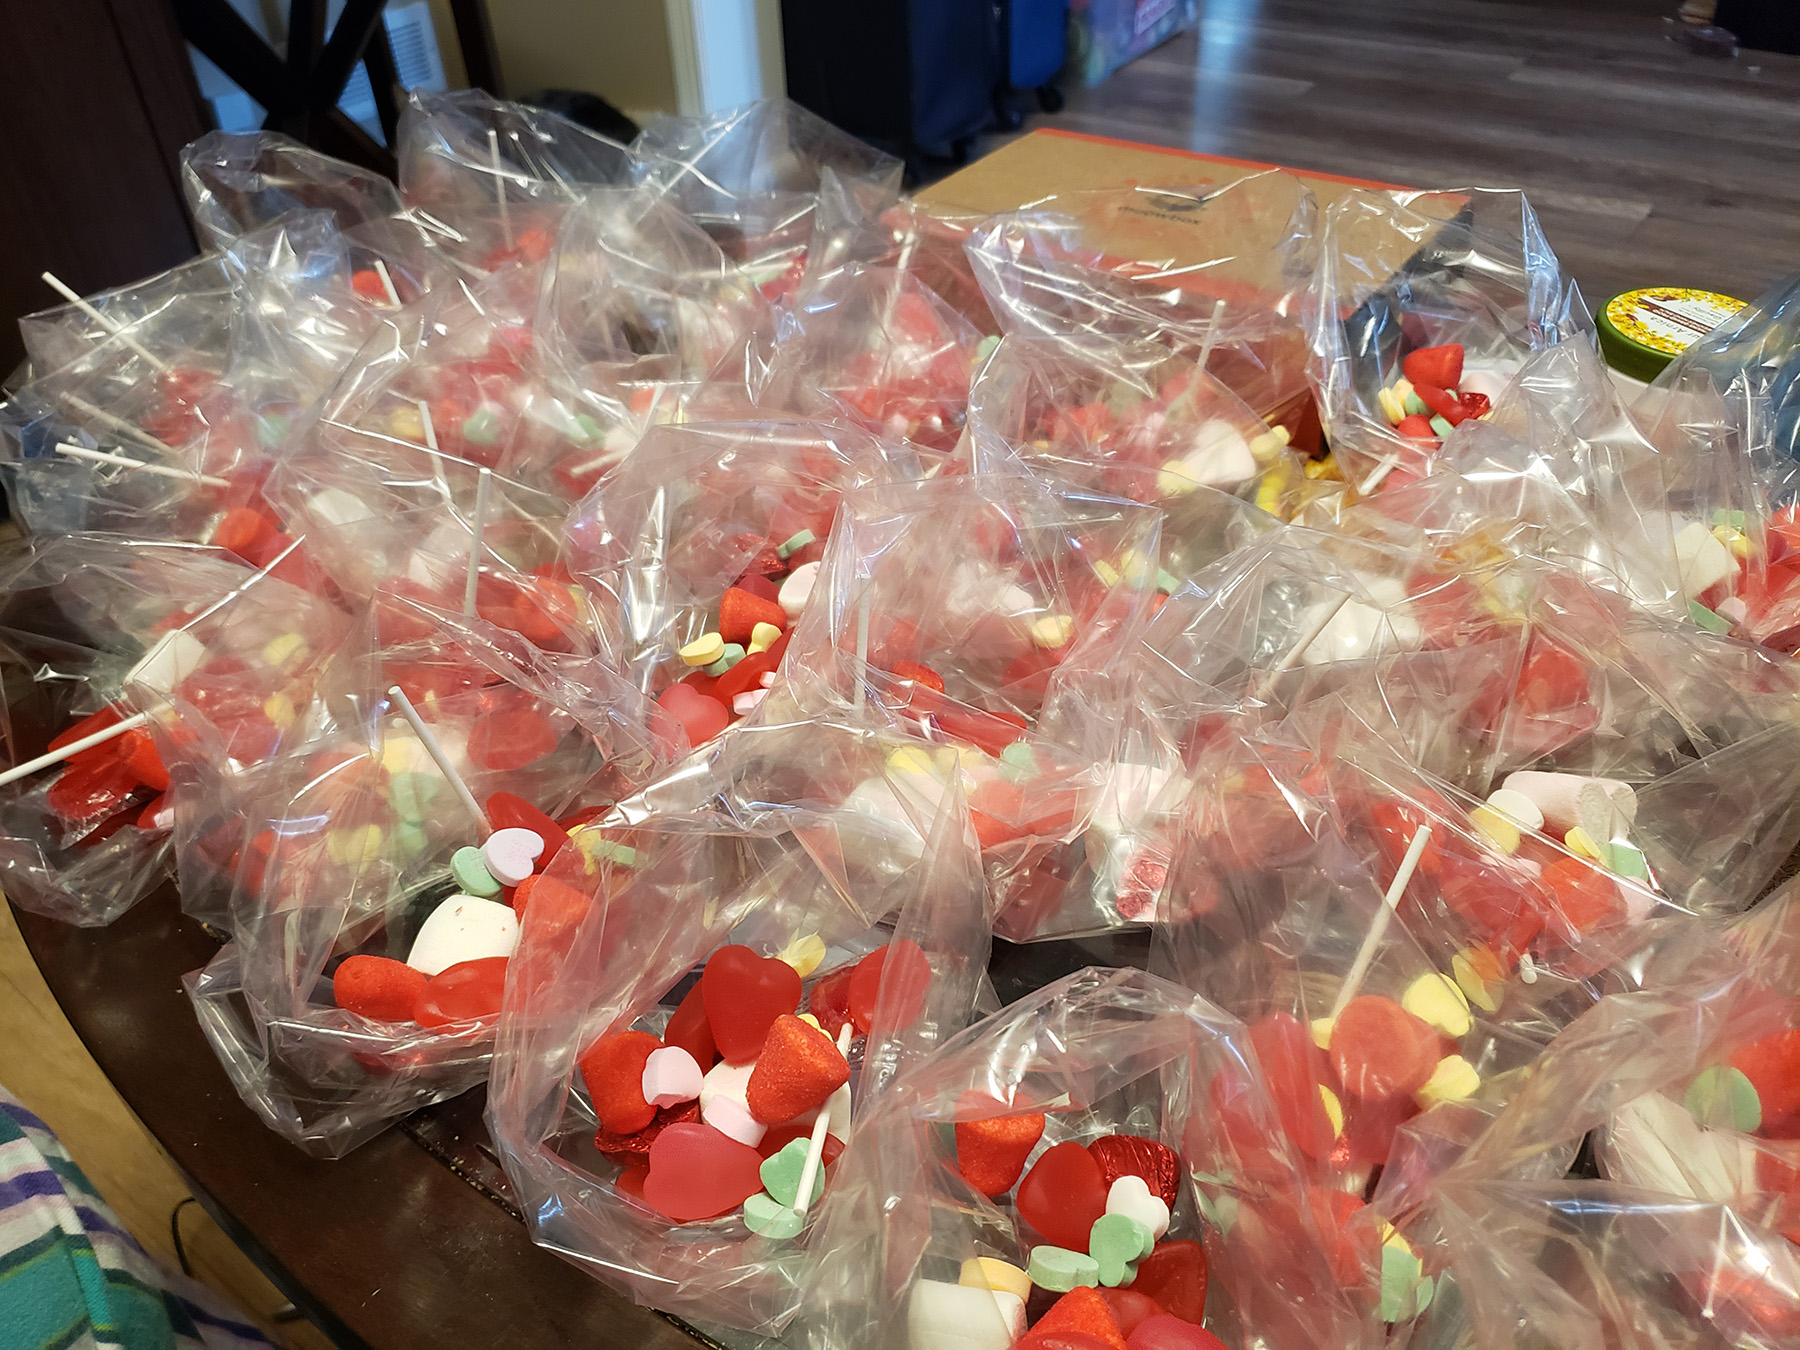 A pile of clear plastic goodie bags filled with red and white candy.